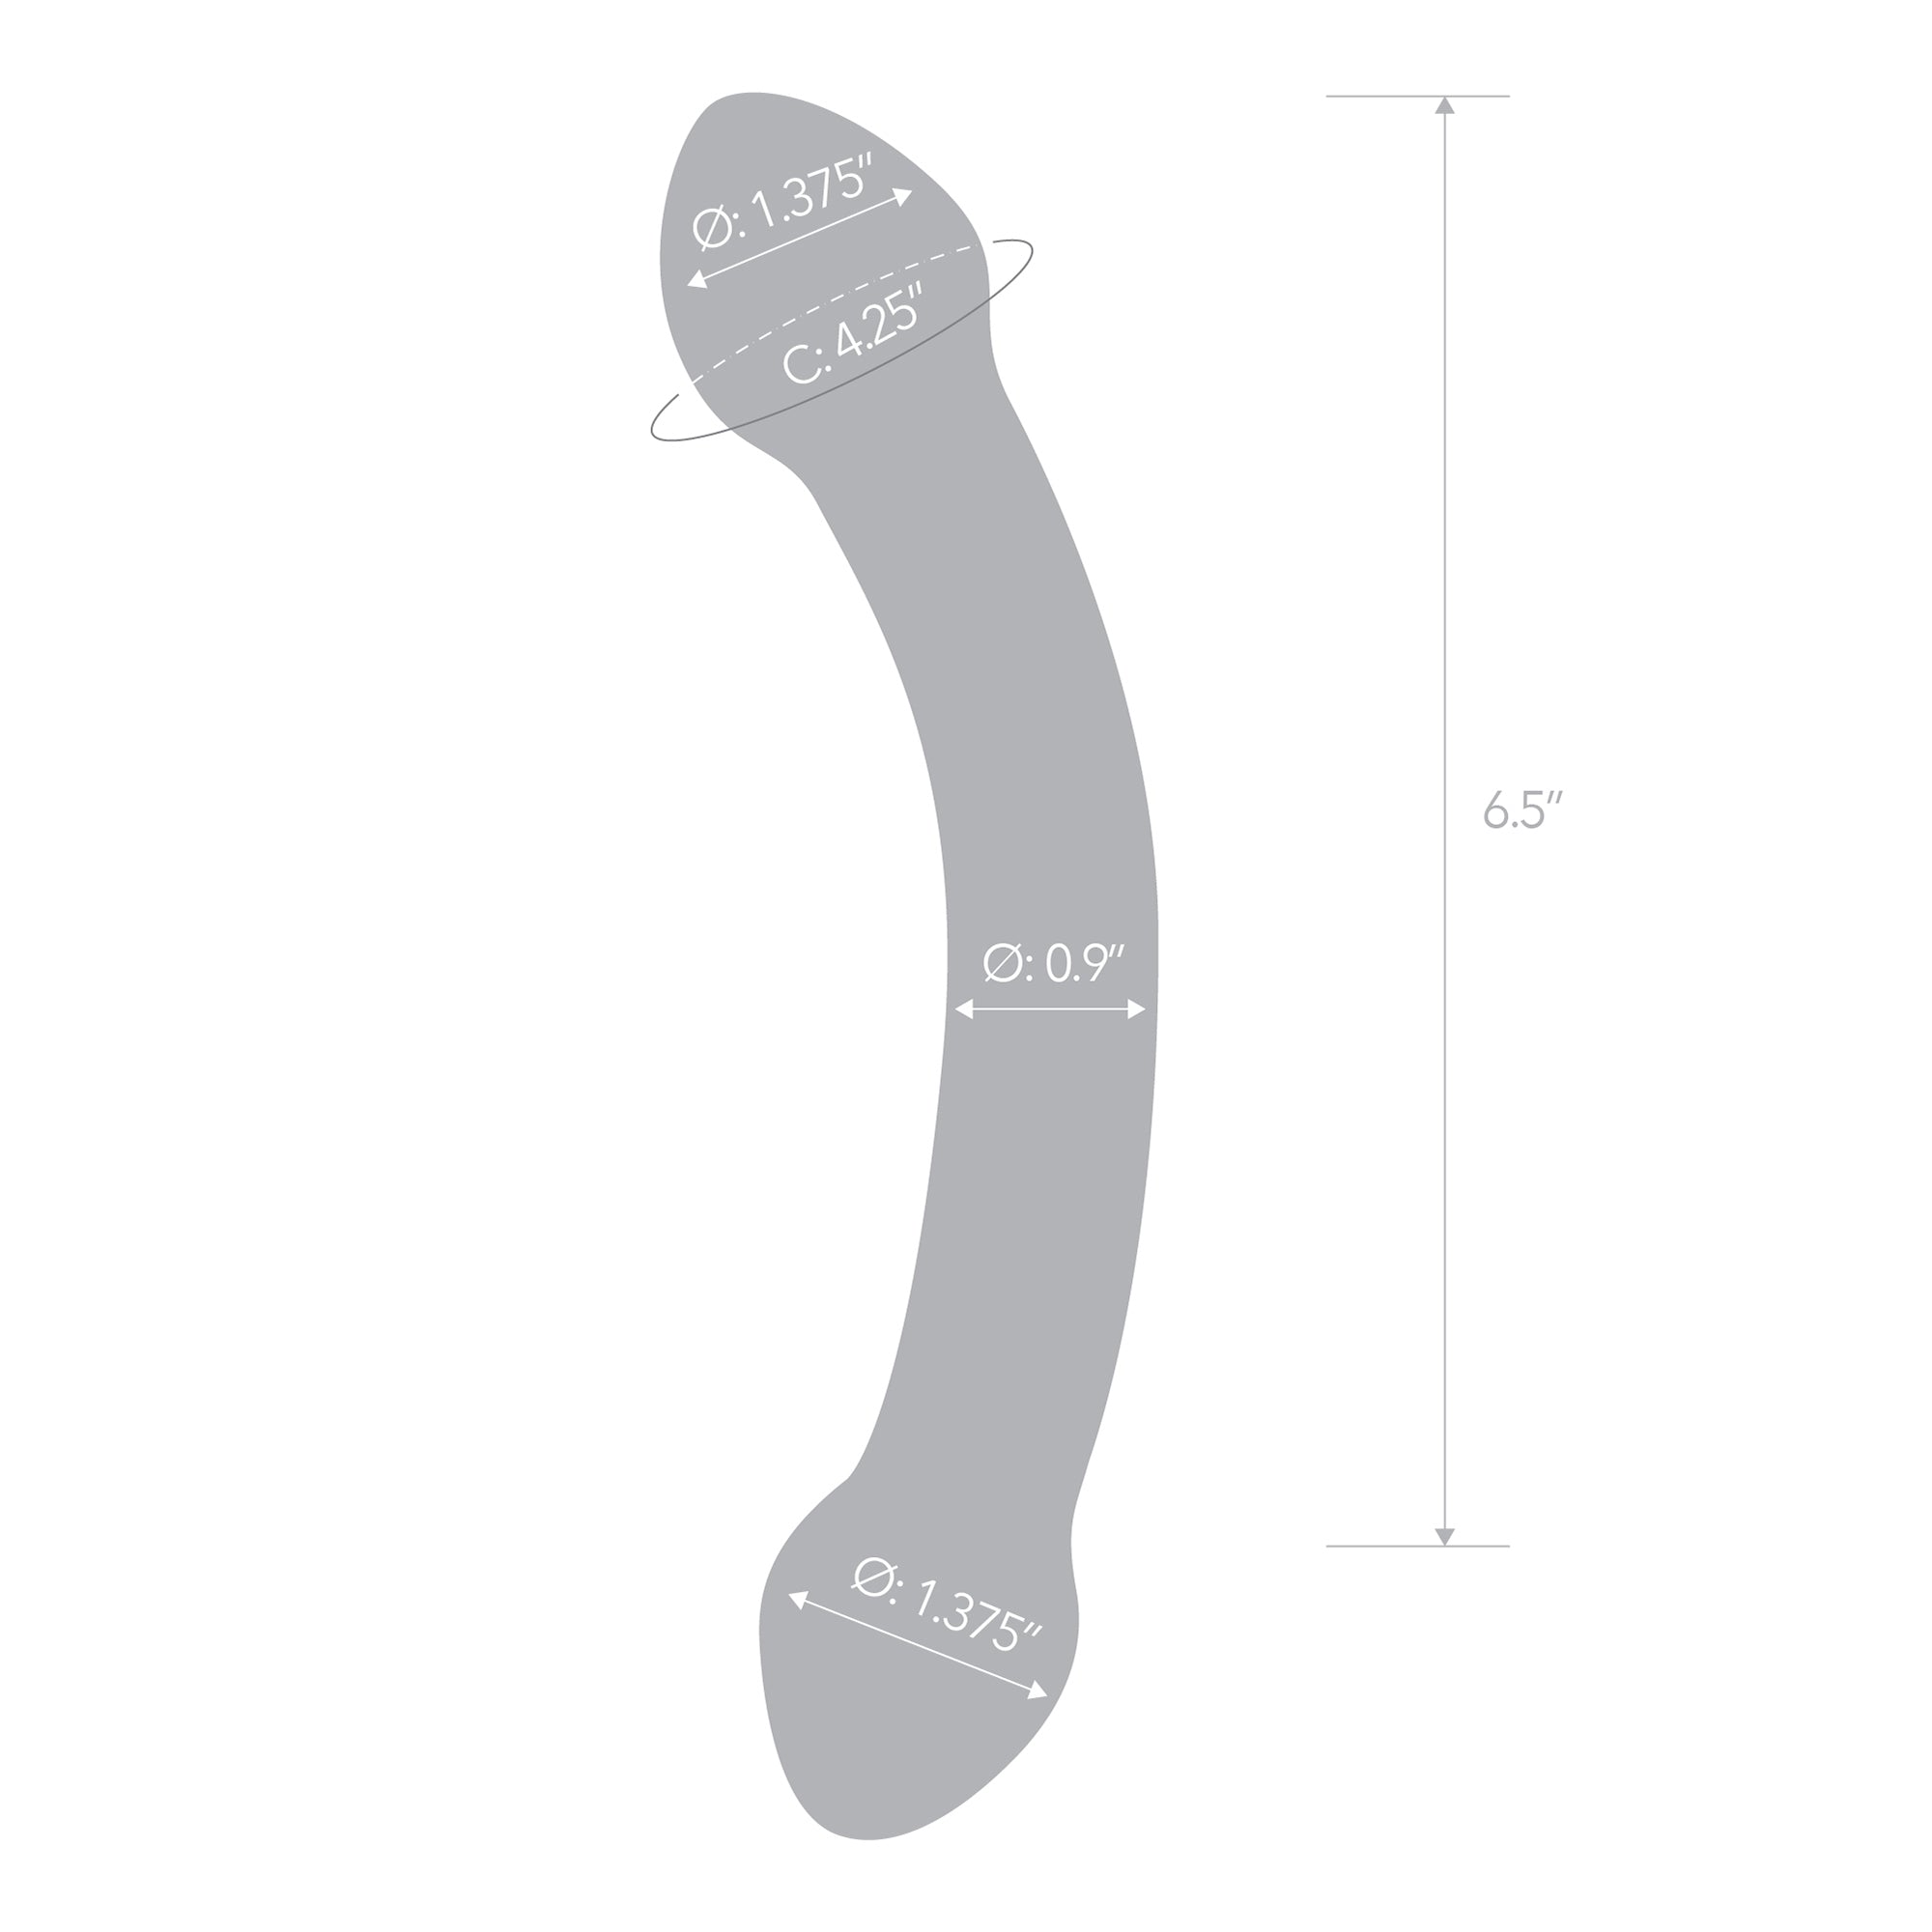 Specifications of the Gläs Double Trouble Purple Glass Dildo